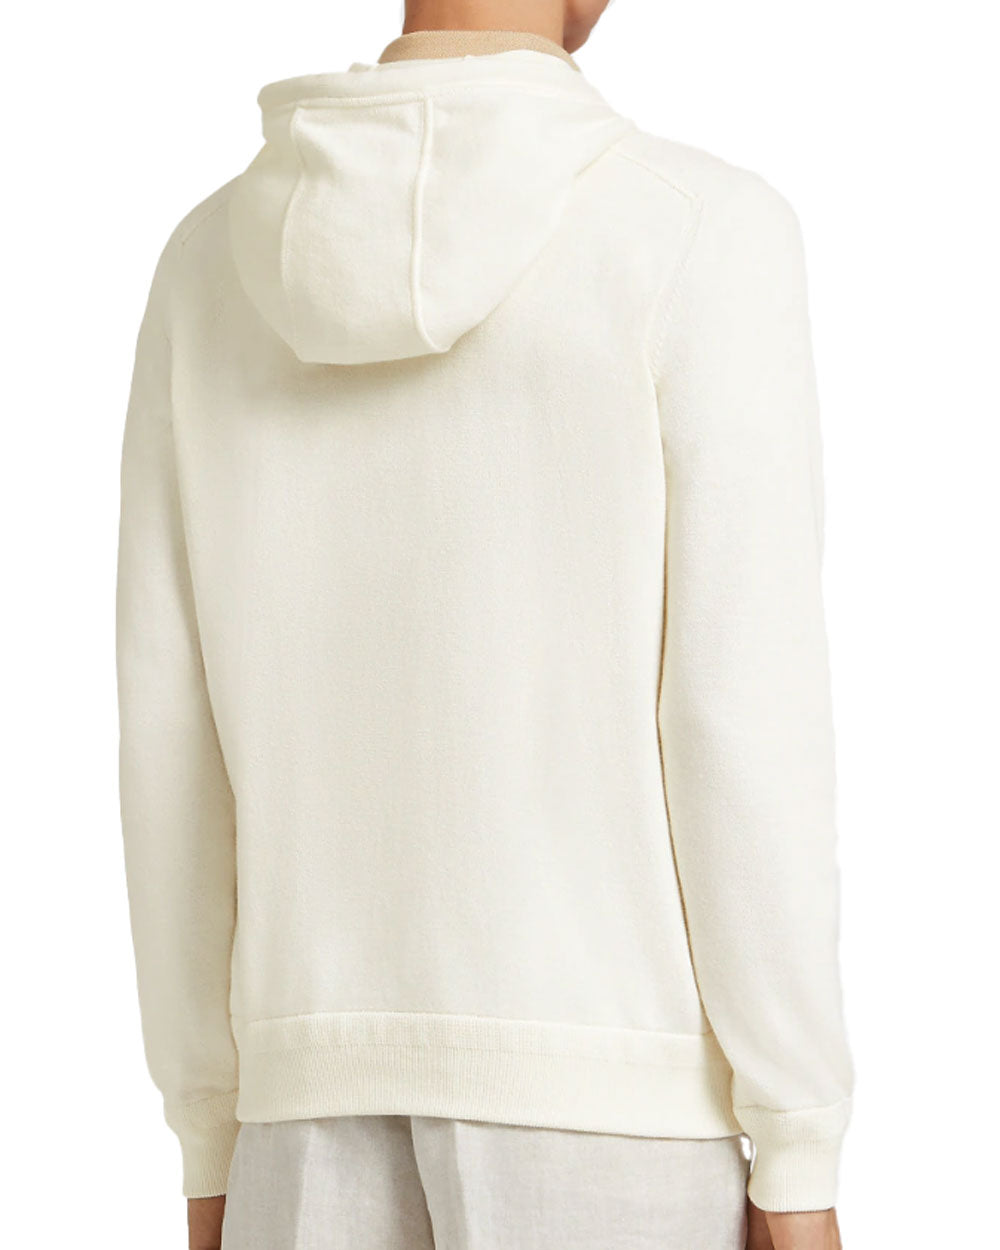 Cotton and Cashmere Hoodie in Cream